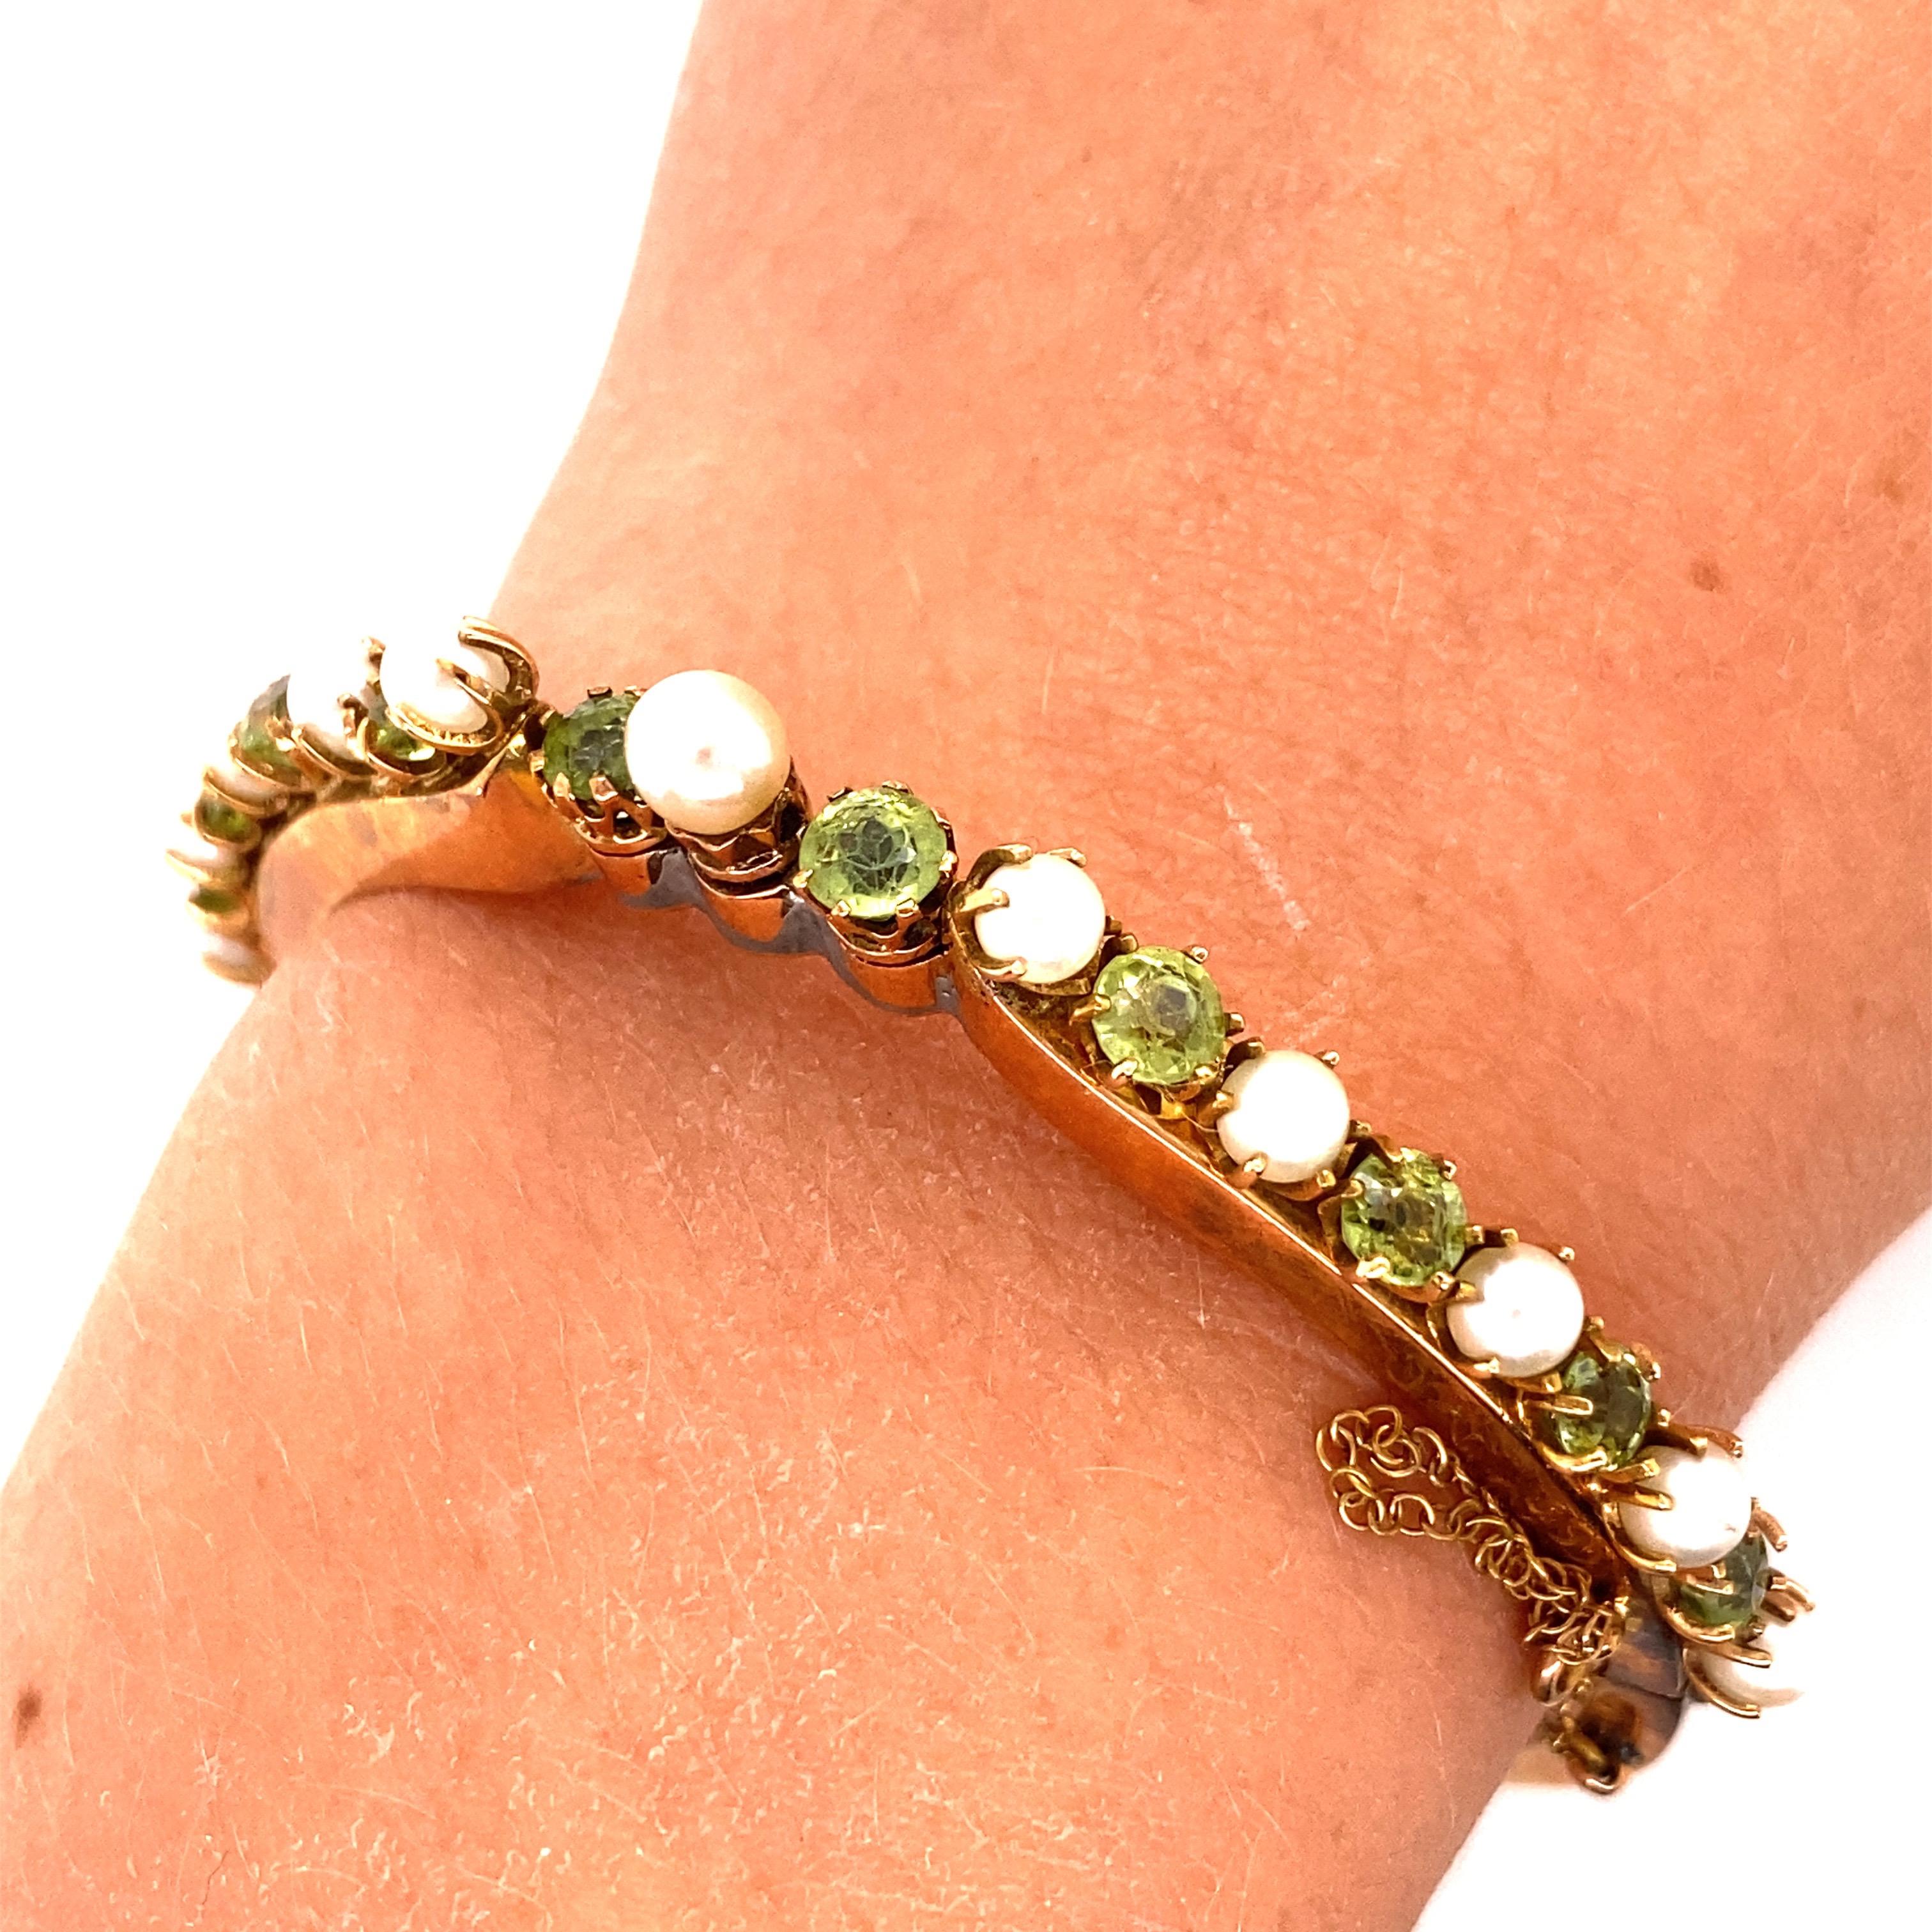 Vintage 14K Rose Gold Pearl and Peridot Bangle Bracelet - The bracelet contains 11 4mm pearls and 10 3.5 - 4mm peridots. The bracelets width is 4.9mm on the top and tapers to 3.4mm on the bottom. The inside diameter is 2 inches high and 2 inches